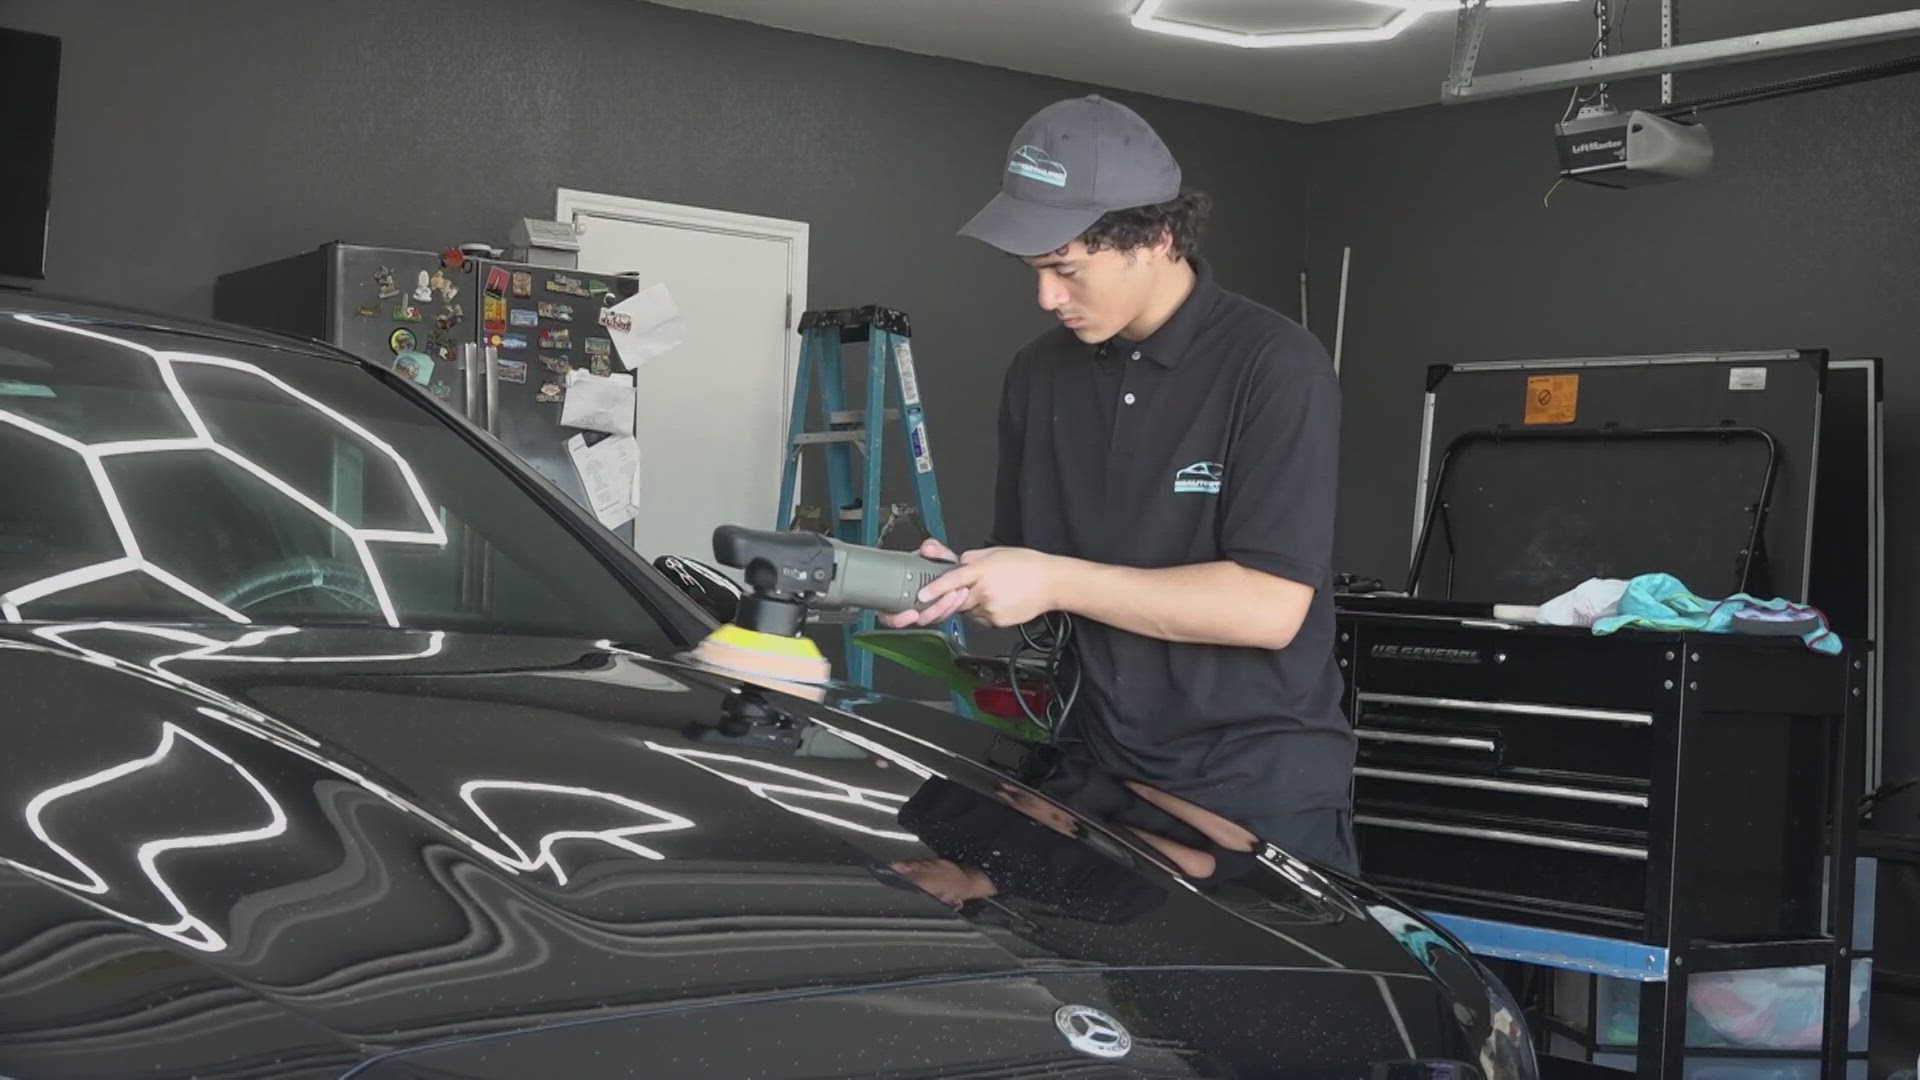 Joe Hernandez is just 15 years old, but his new auto detailing business is already hitting five stars on Google reviews.